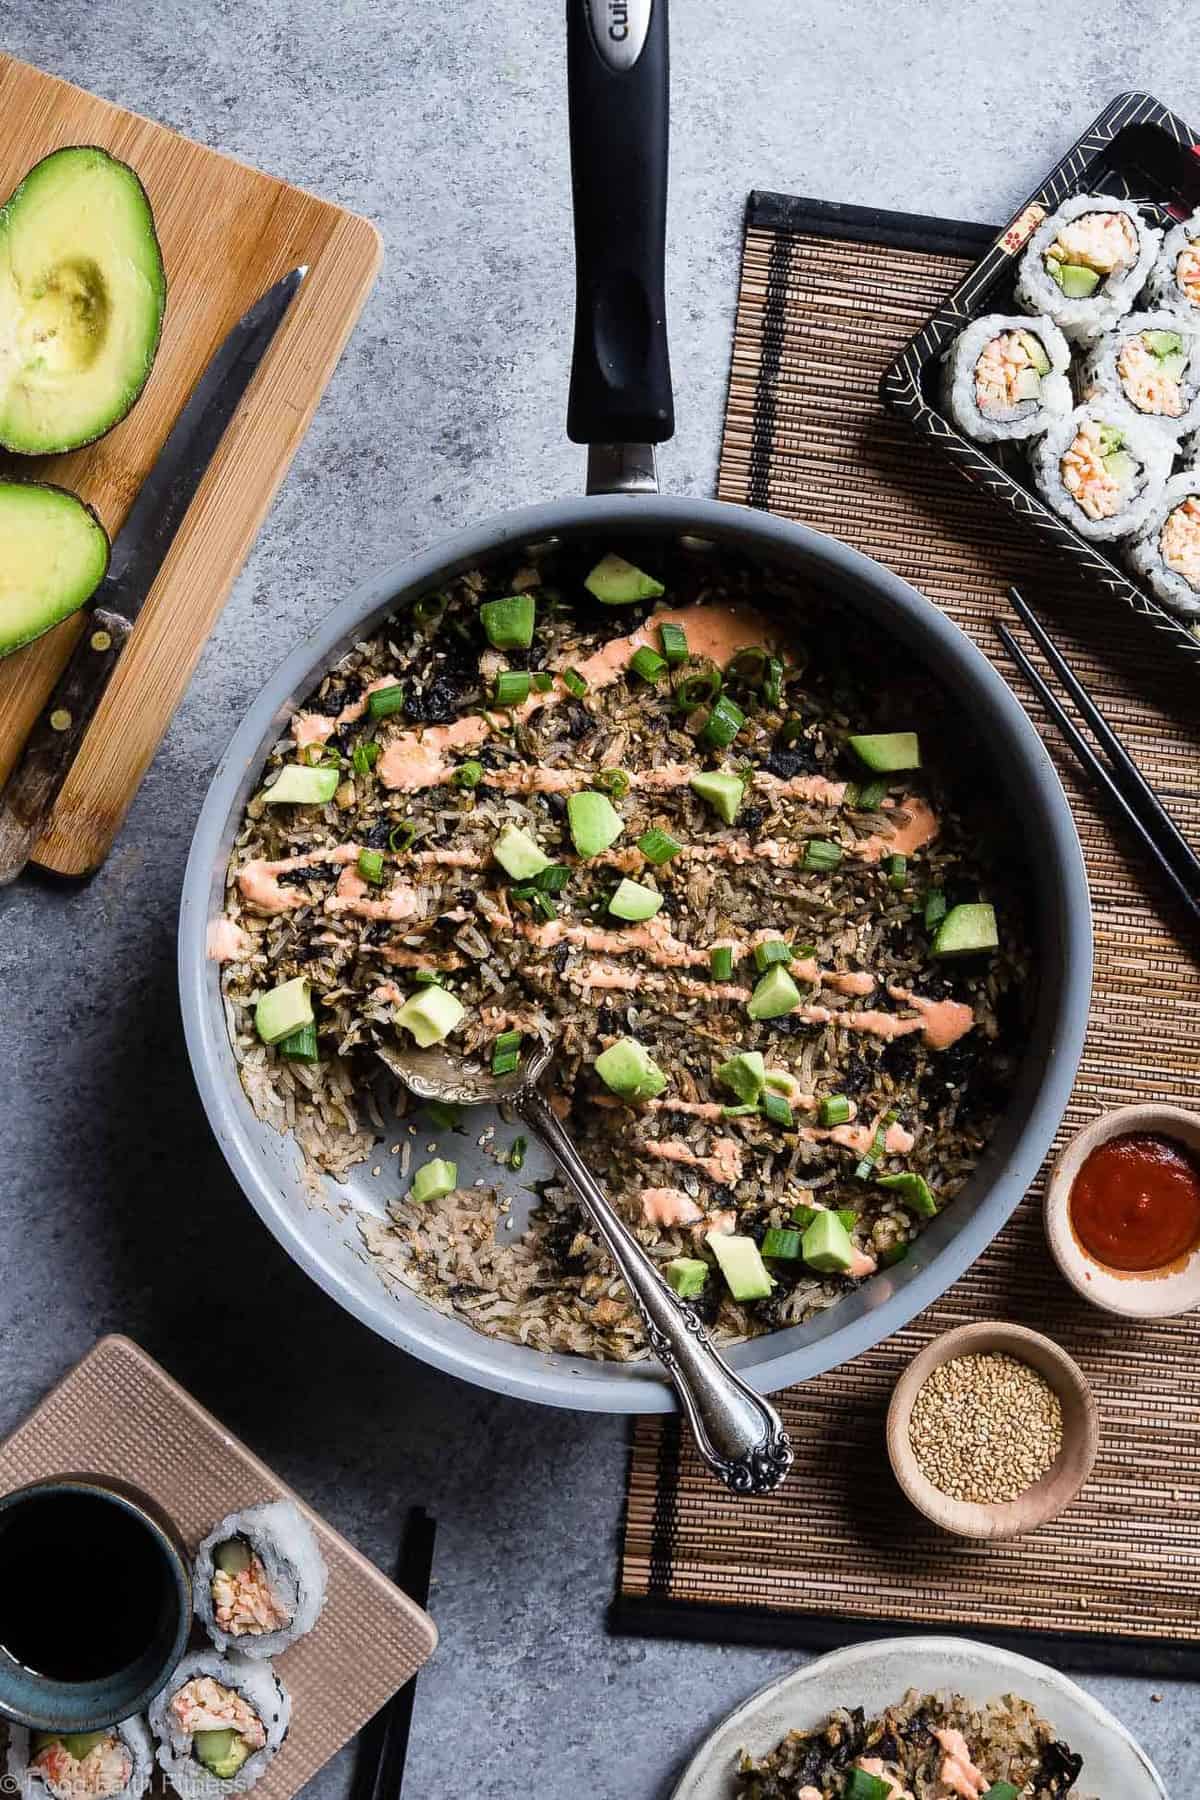 One Pot Spicy Tuna Rice Casserole - This easy, one-pot casserole tastes like a sushi roll, in a healthy, gluten free weeknight dinner form, with no messing rolling required! A crowd-pleasing meal that only requires on dish! | #Foodfaithfitness | #Glutenfree #Healthy #Casserole #Onepot